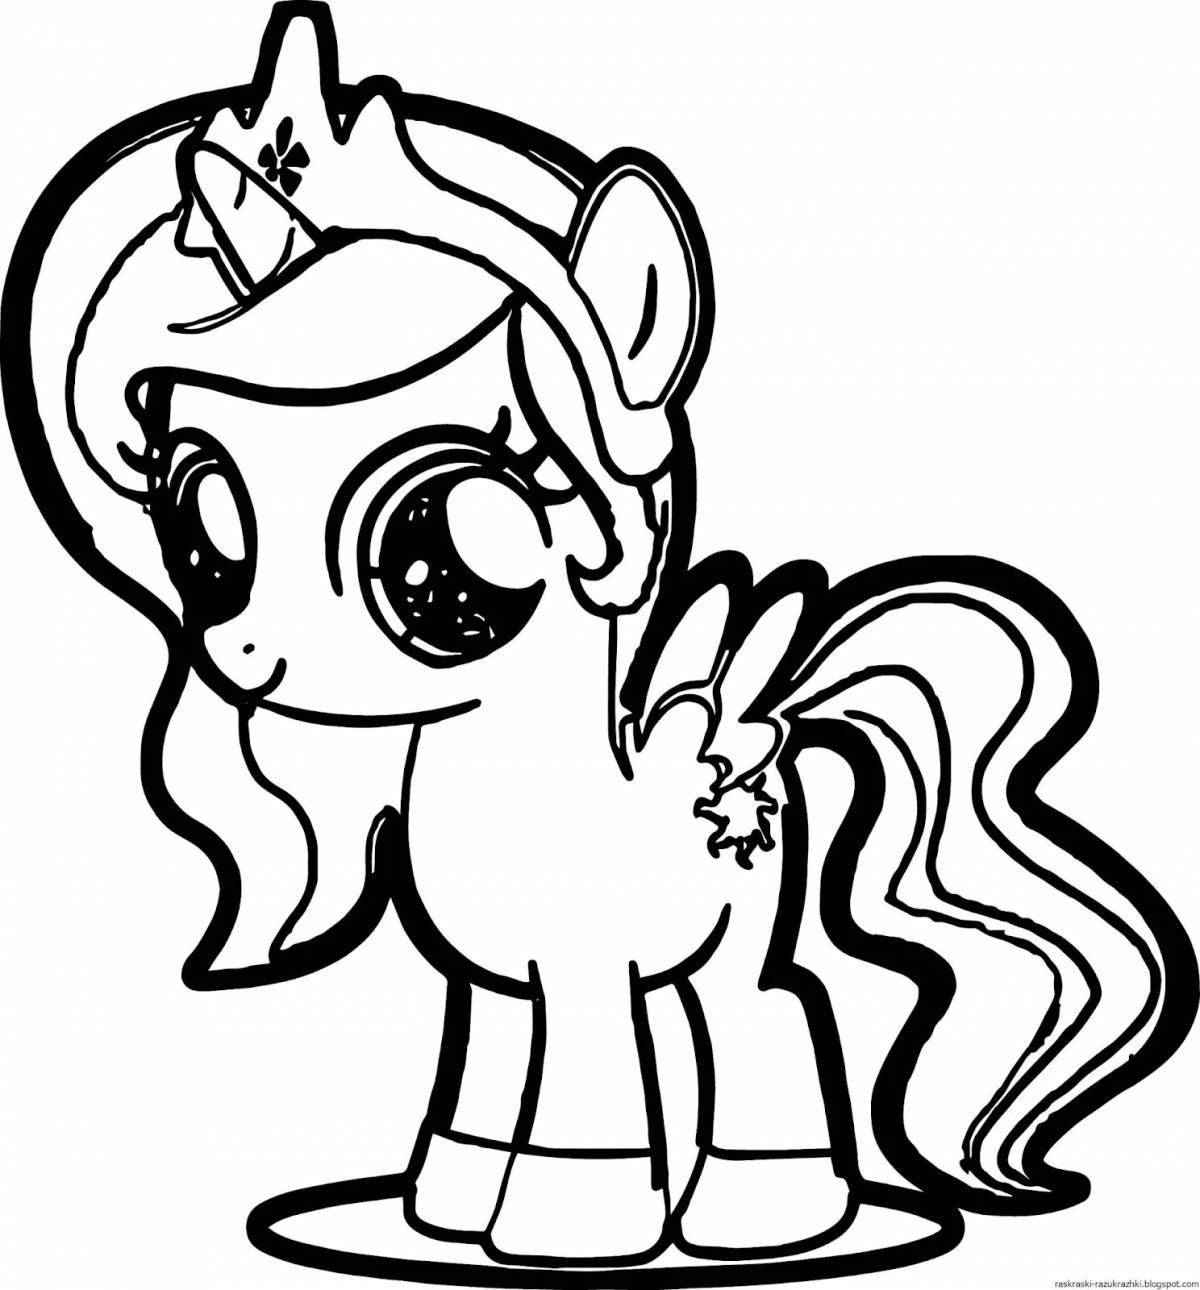 Coloring pony for kids